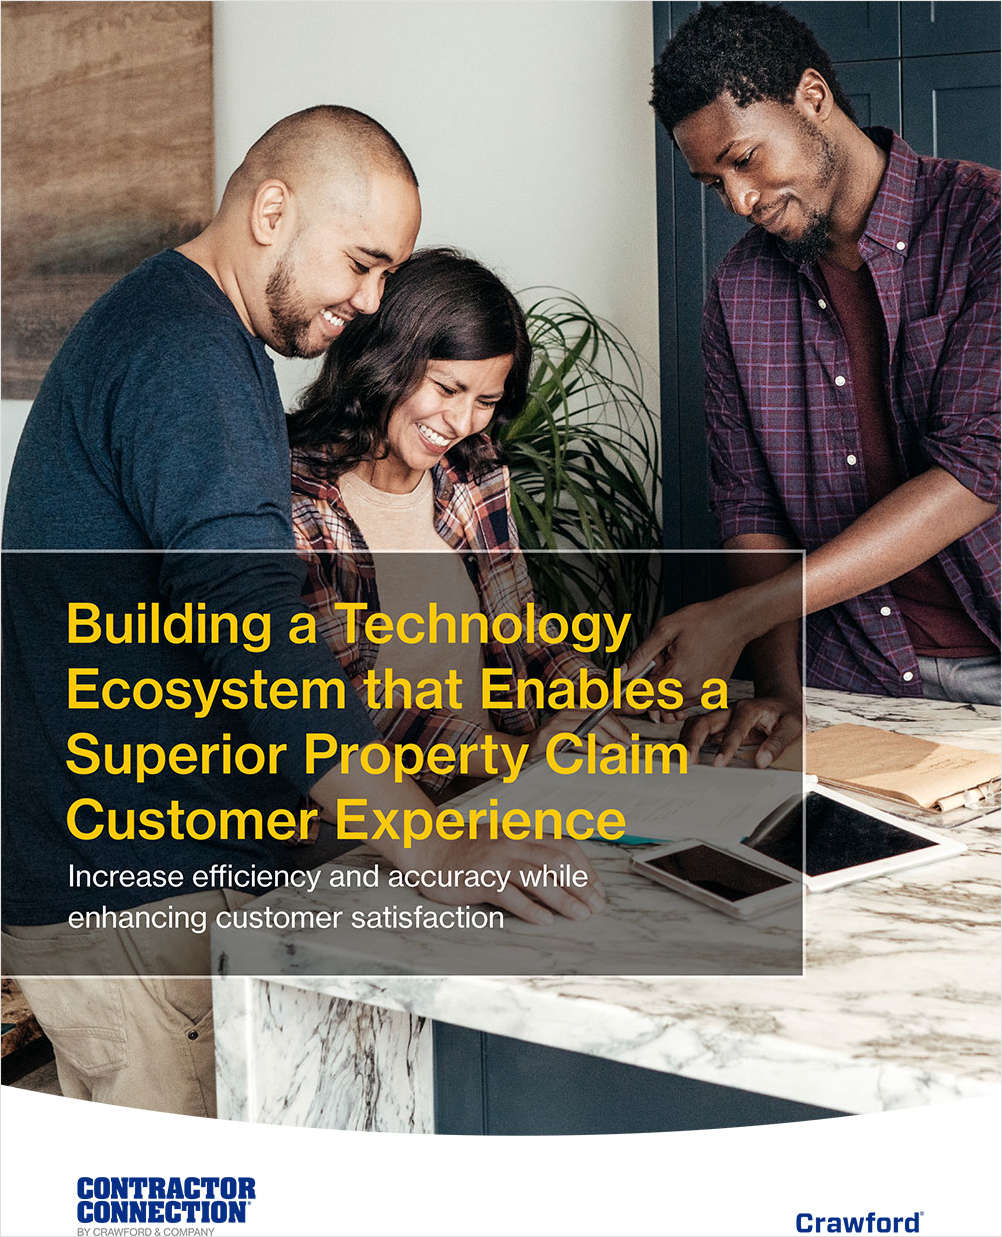 Building a Technology Ecosystem that Enables a Superior Property Claim Customer Experience